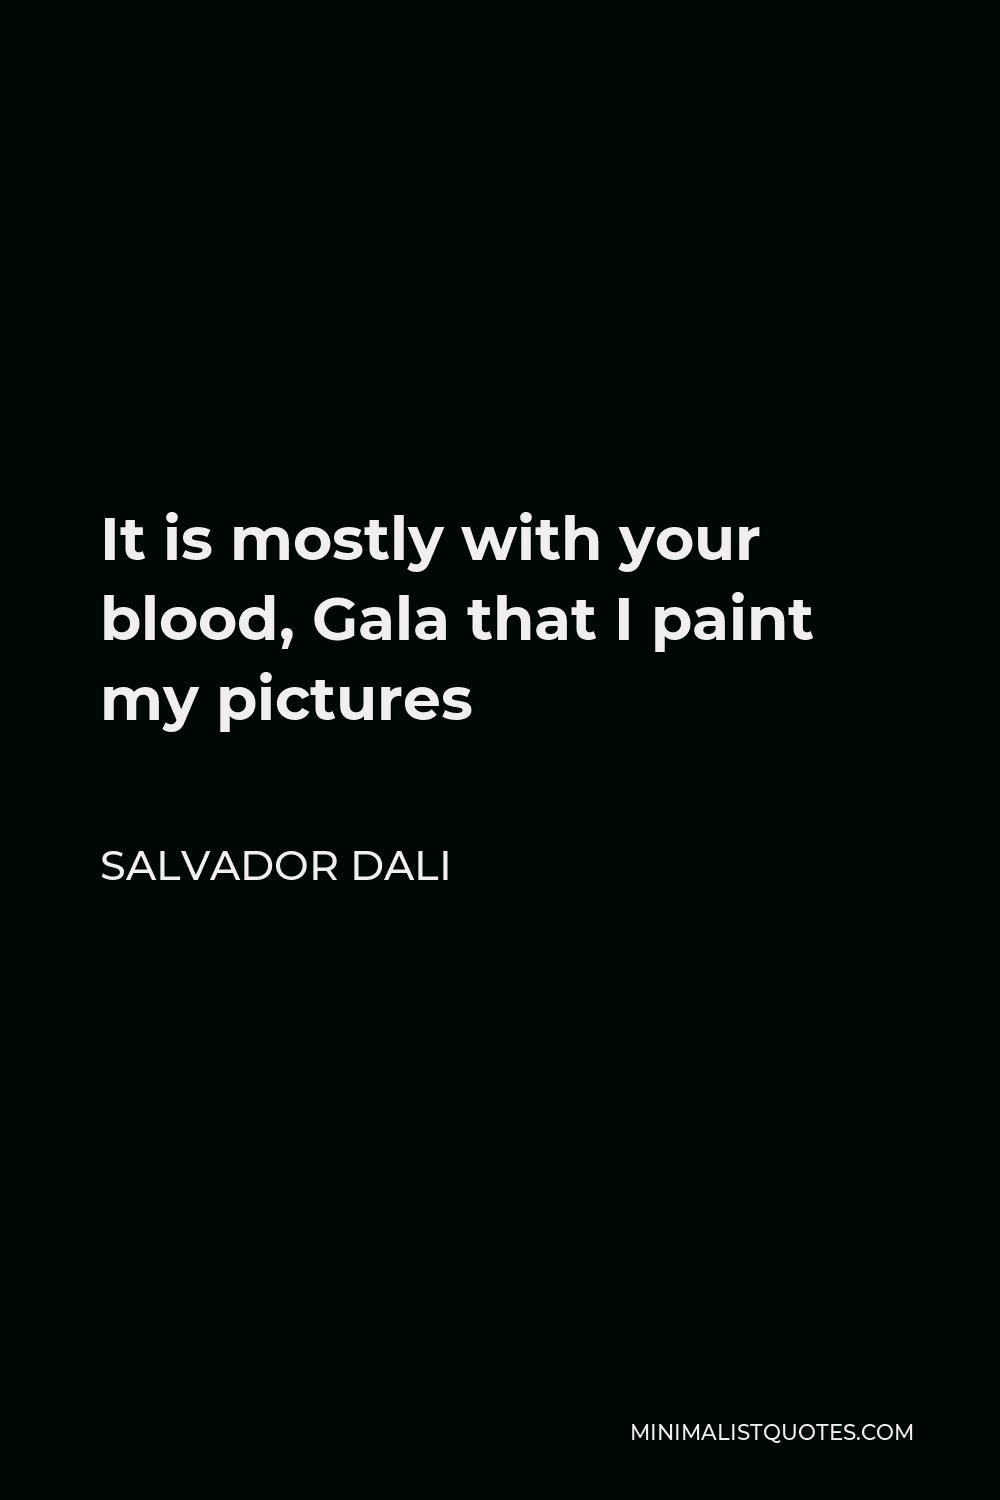 Salvador Dali Quote - It is mostly with your blood, Gala that I paint my pictures